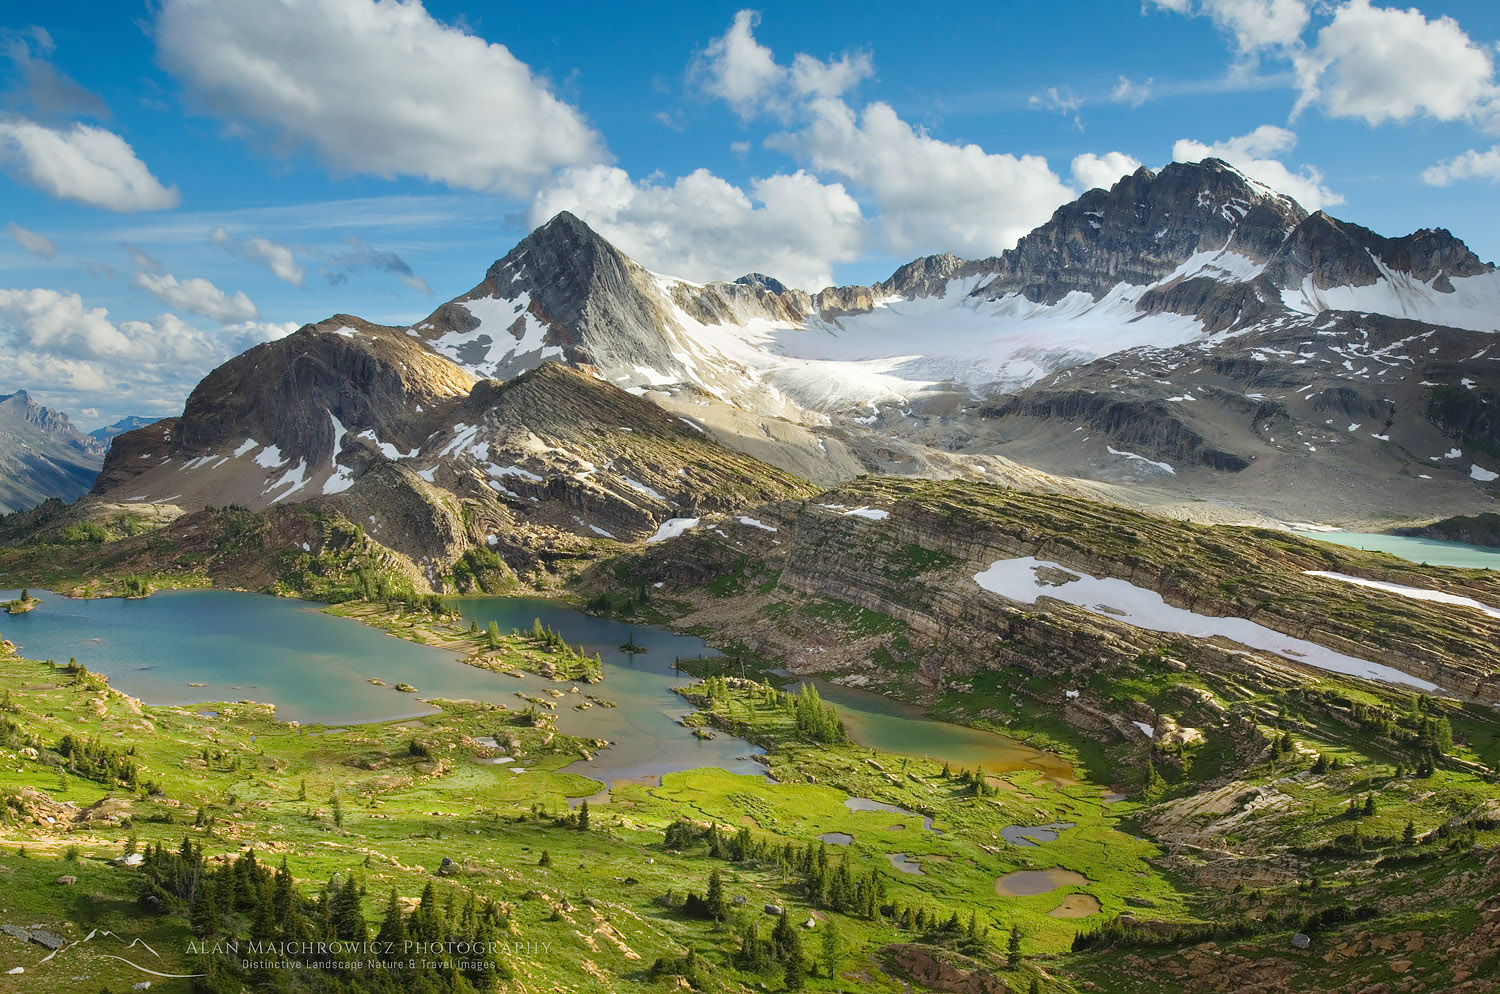 Russell Peak and Limestone Lakes Basin, Height-of-the-Rockies Provincial Park British Columbia Canada #46109